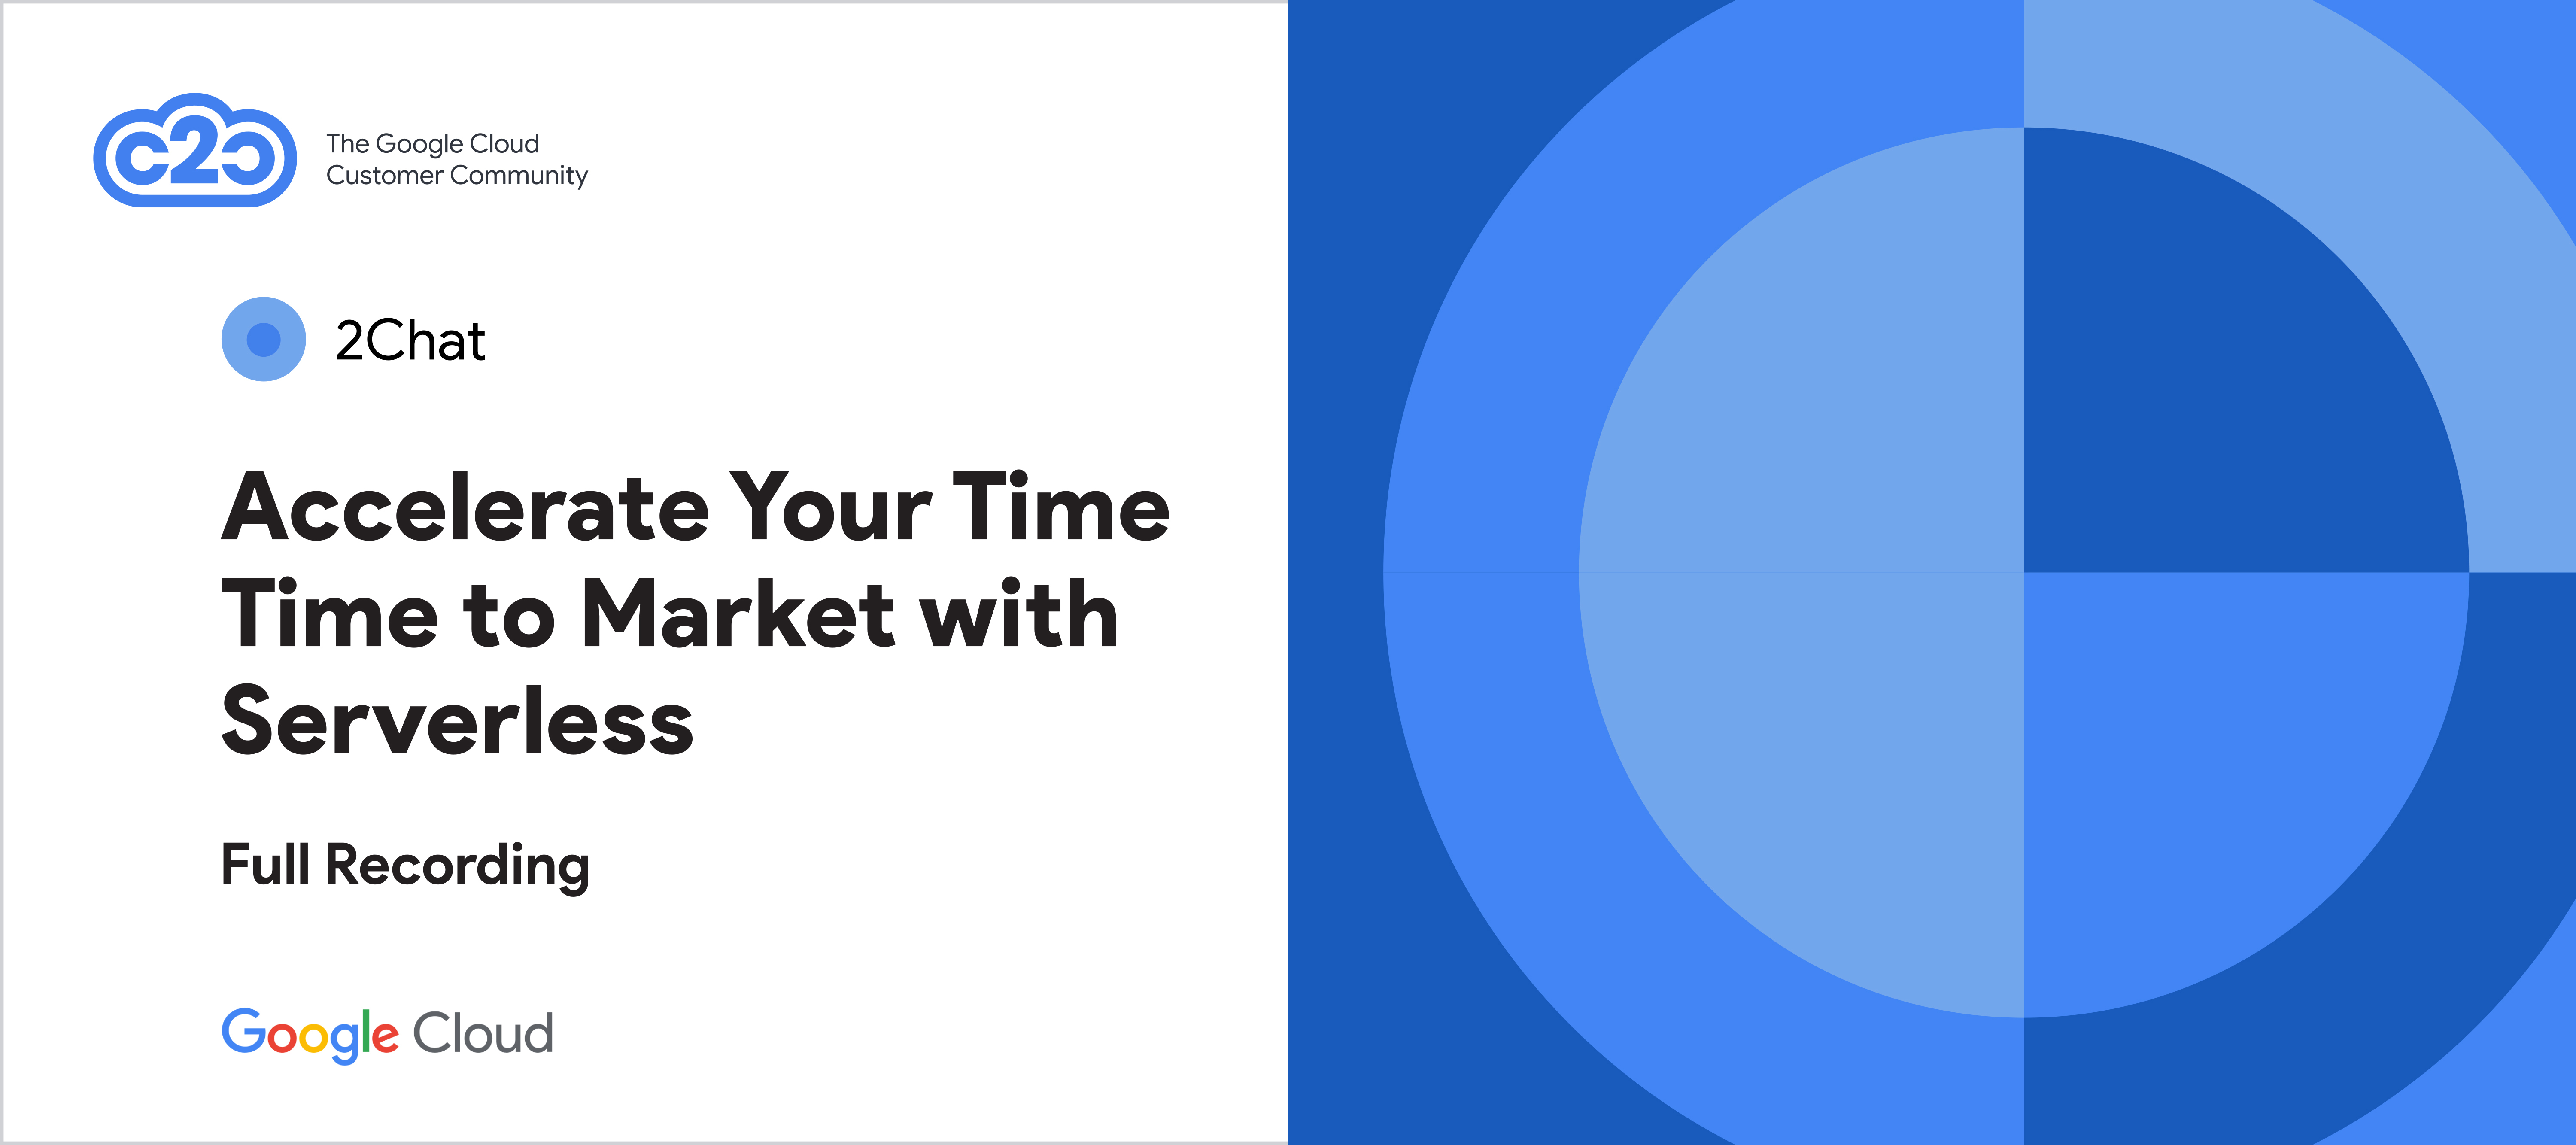 2Chat: Accelerate Your Time to Market with Serverless (full recording)